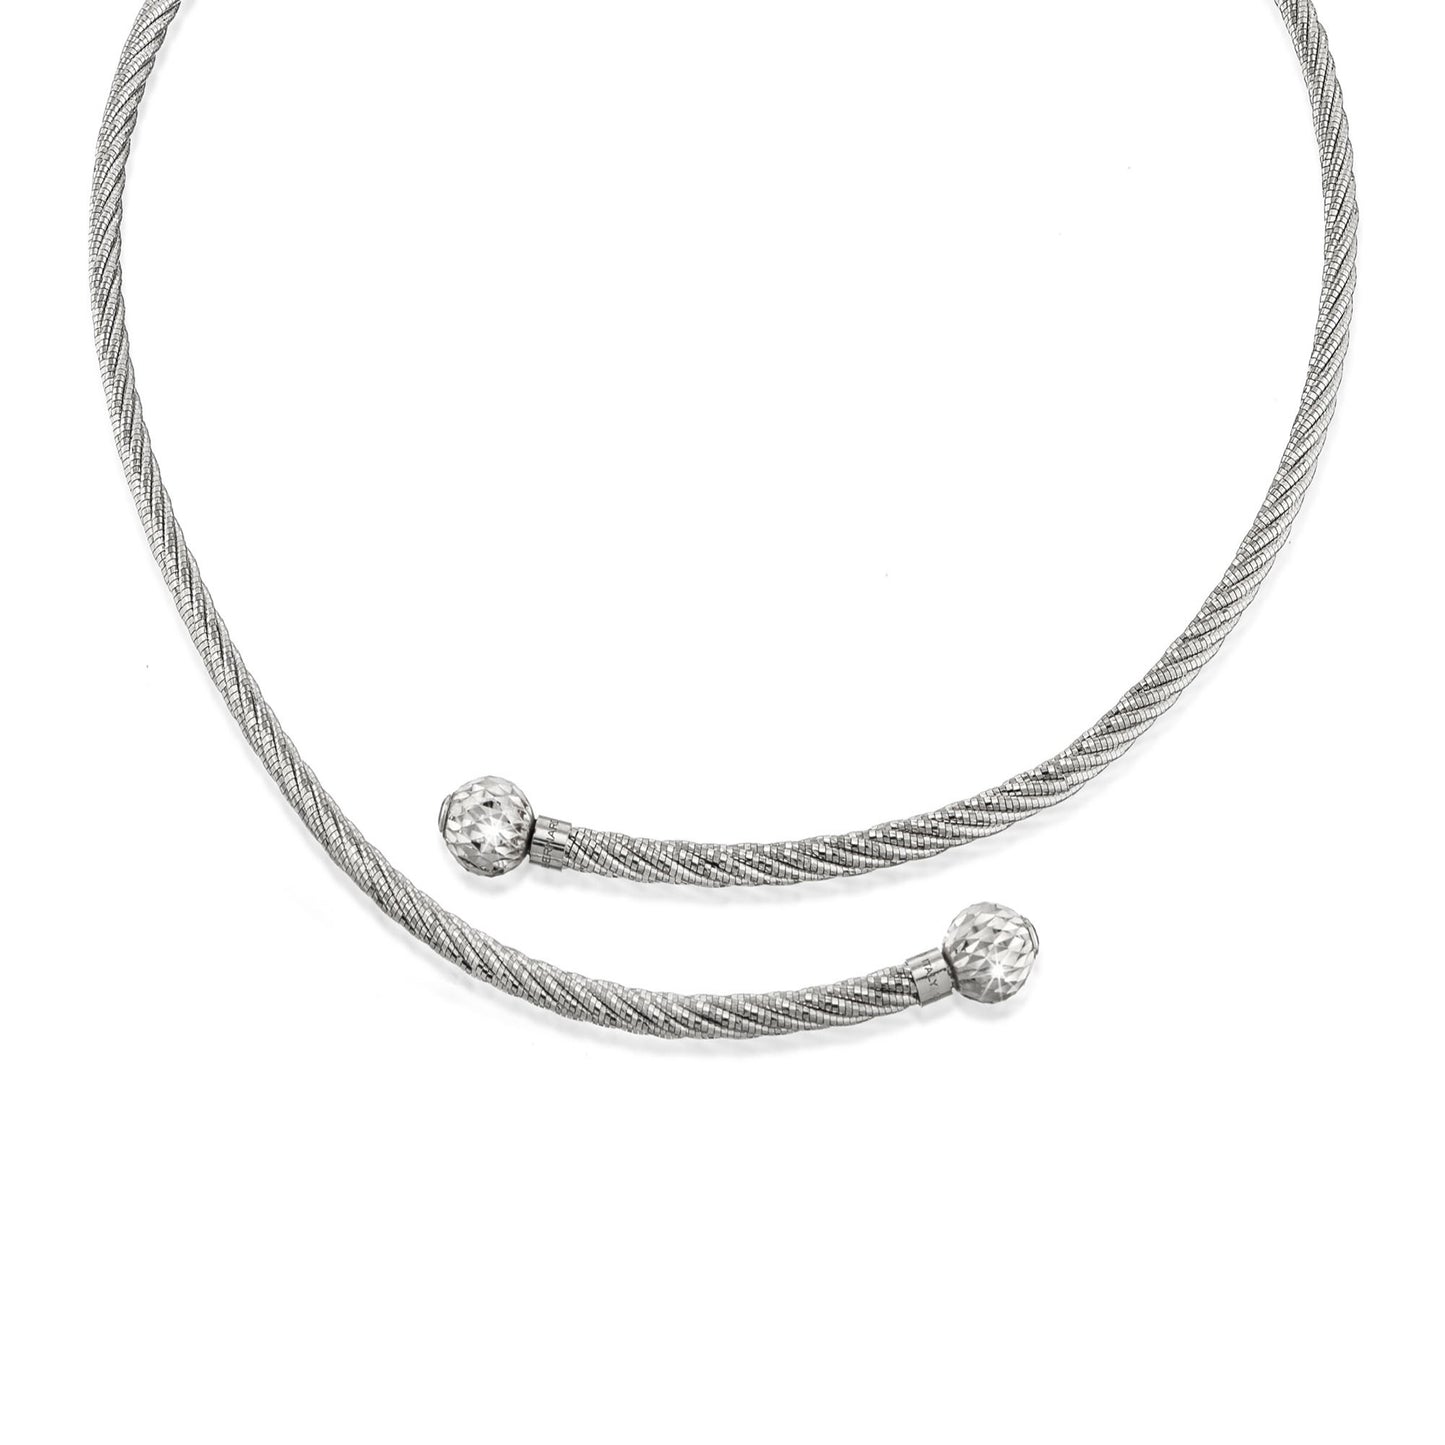 Officina Bernardi Olympia Necklace in Silver with Blue Topaz